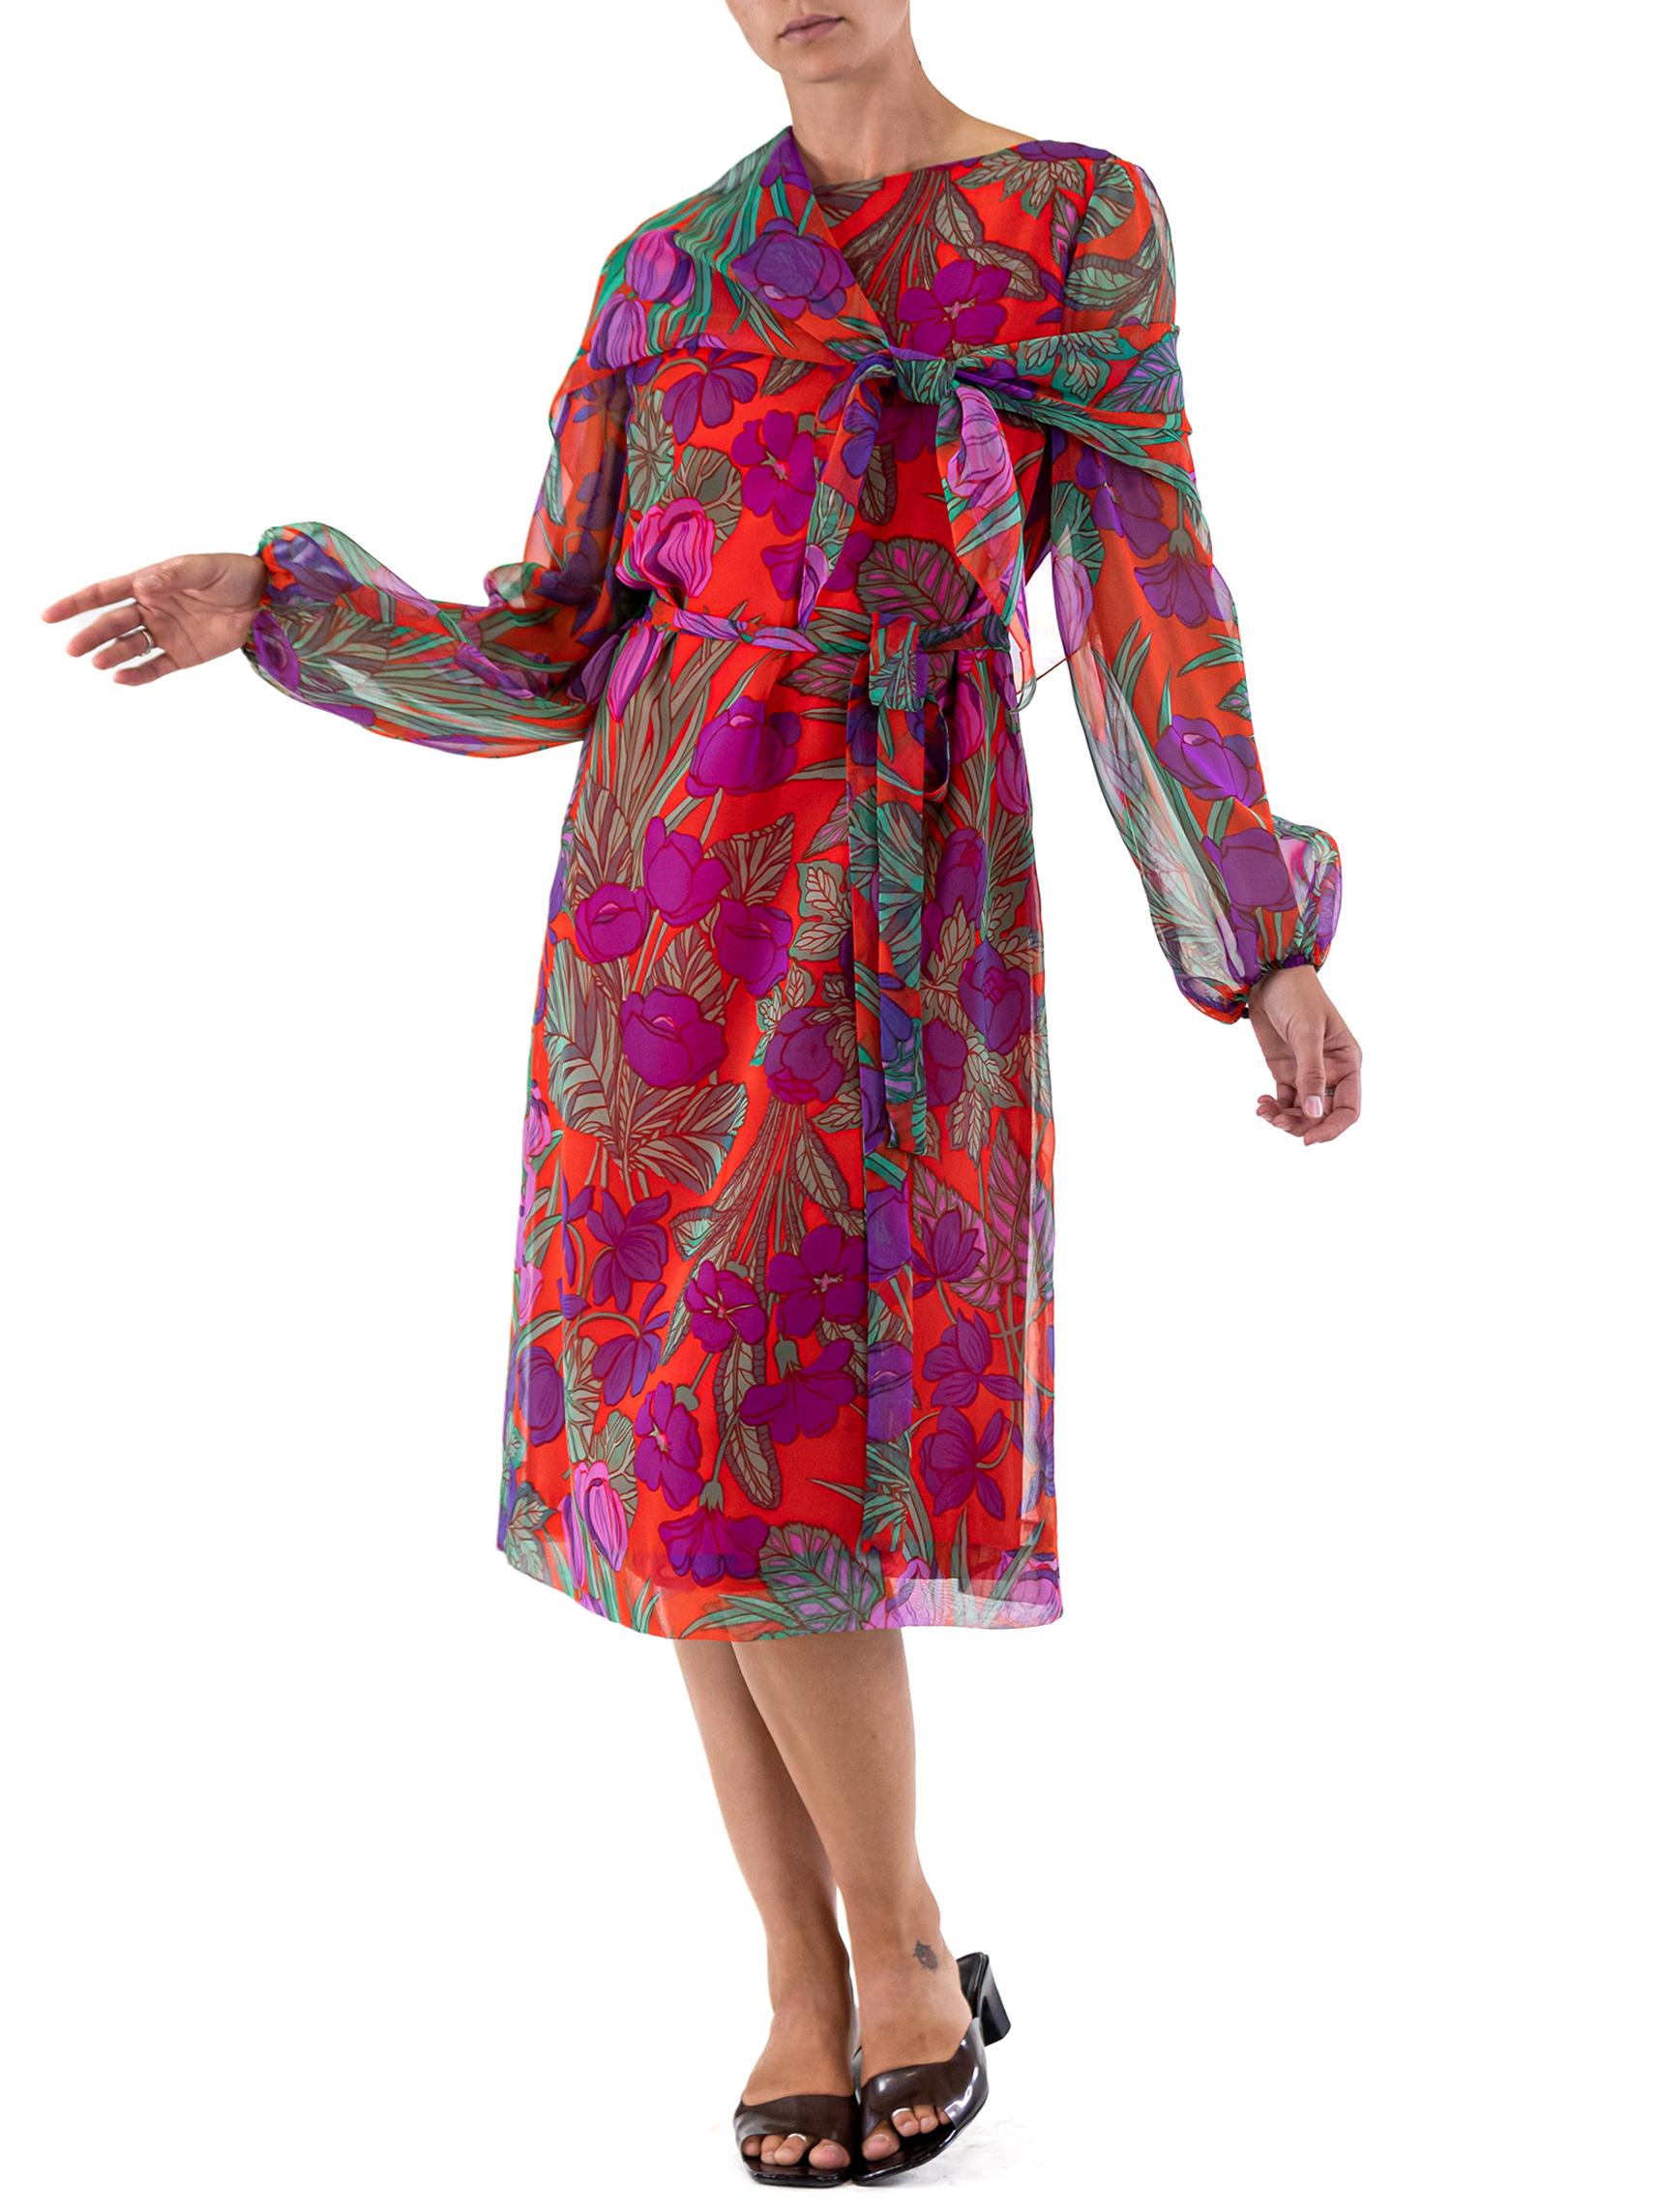 Women's 1960S Red Polyester Chiffon Purple Flower Print Dress With Sash For Sale